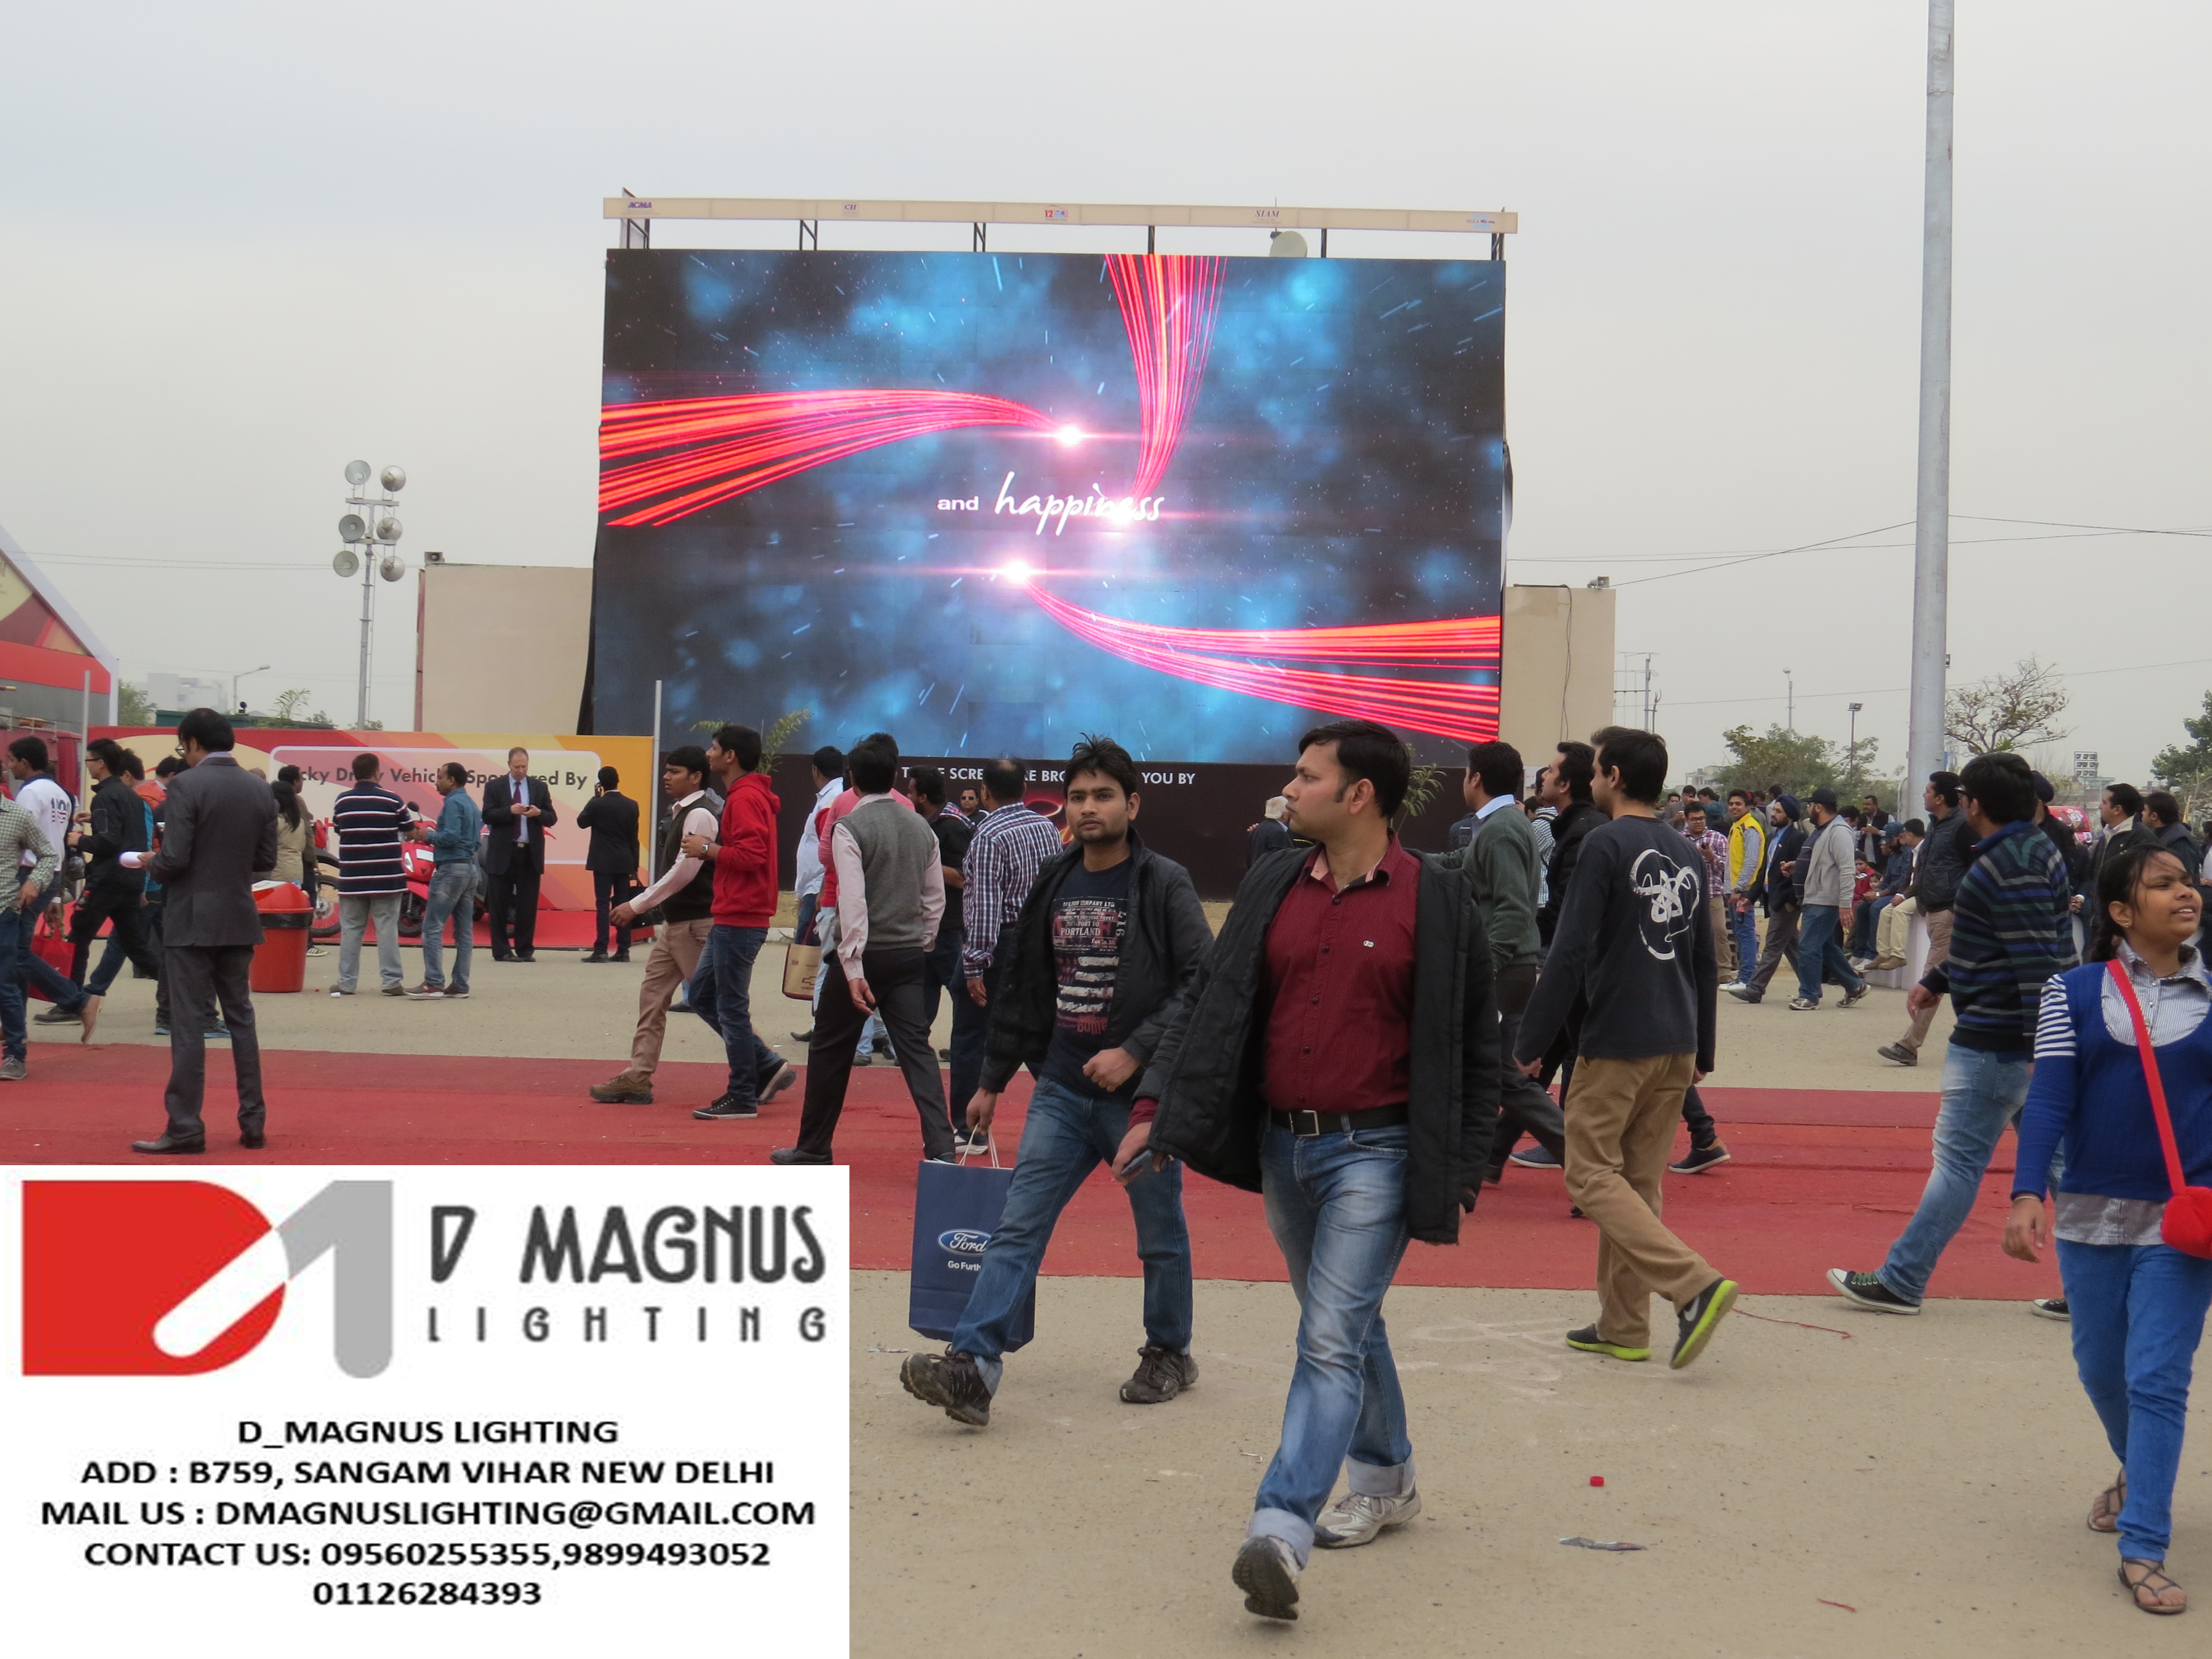 Led screen on rent in LucknowEventsDance - Music ConcertsSouth DelhiEast of Kailash